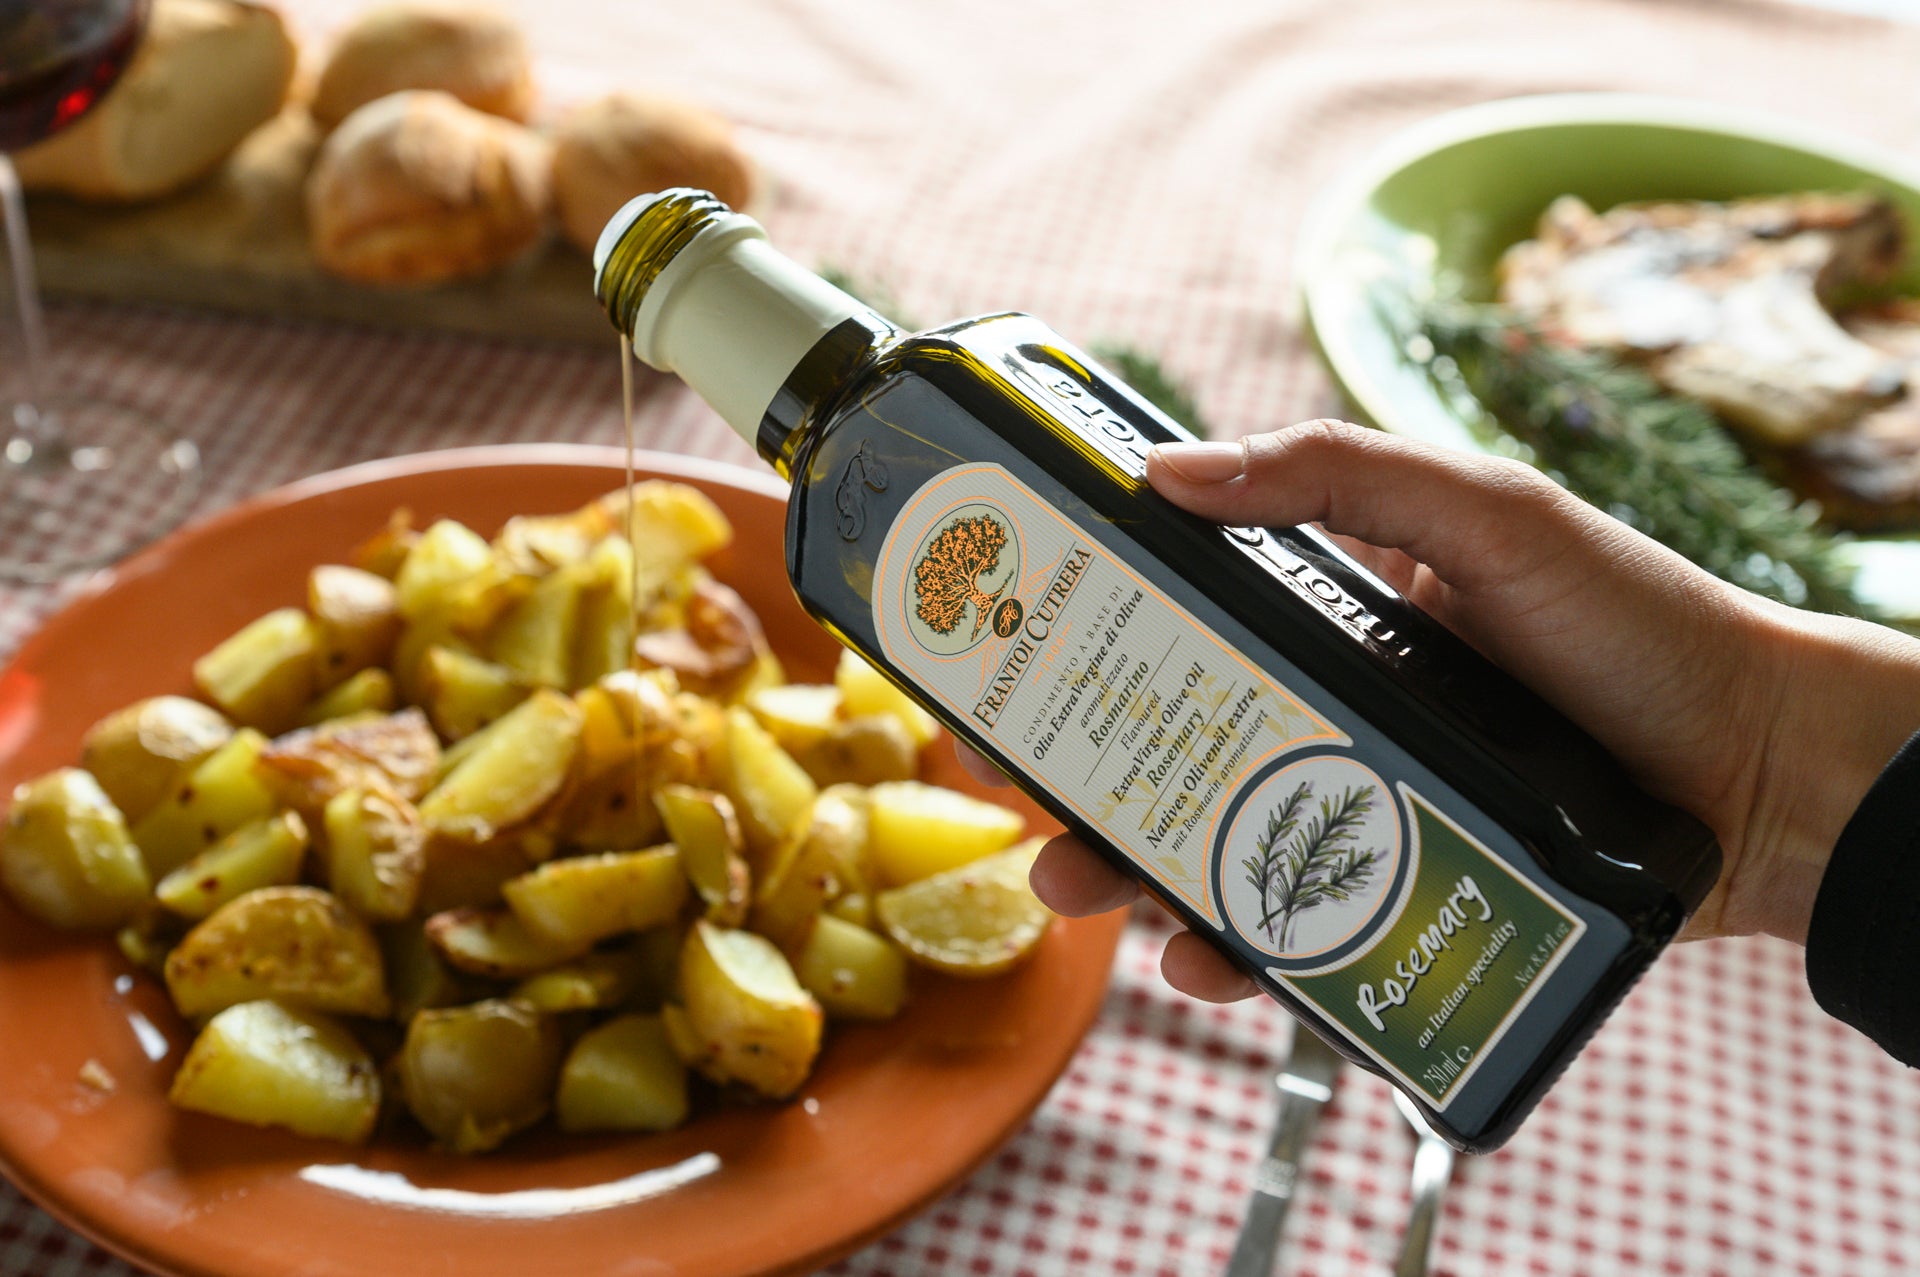 Extra virgin olive oil flavored with rosemary